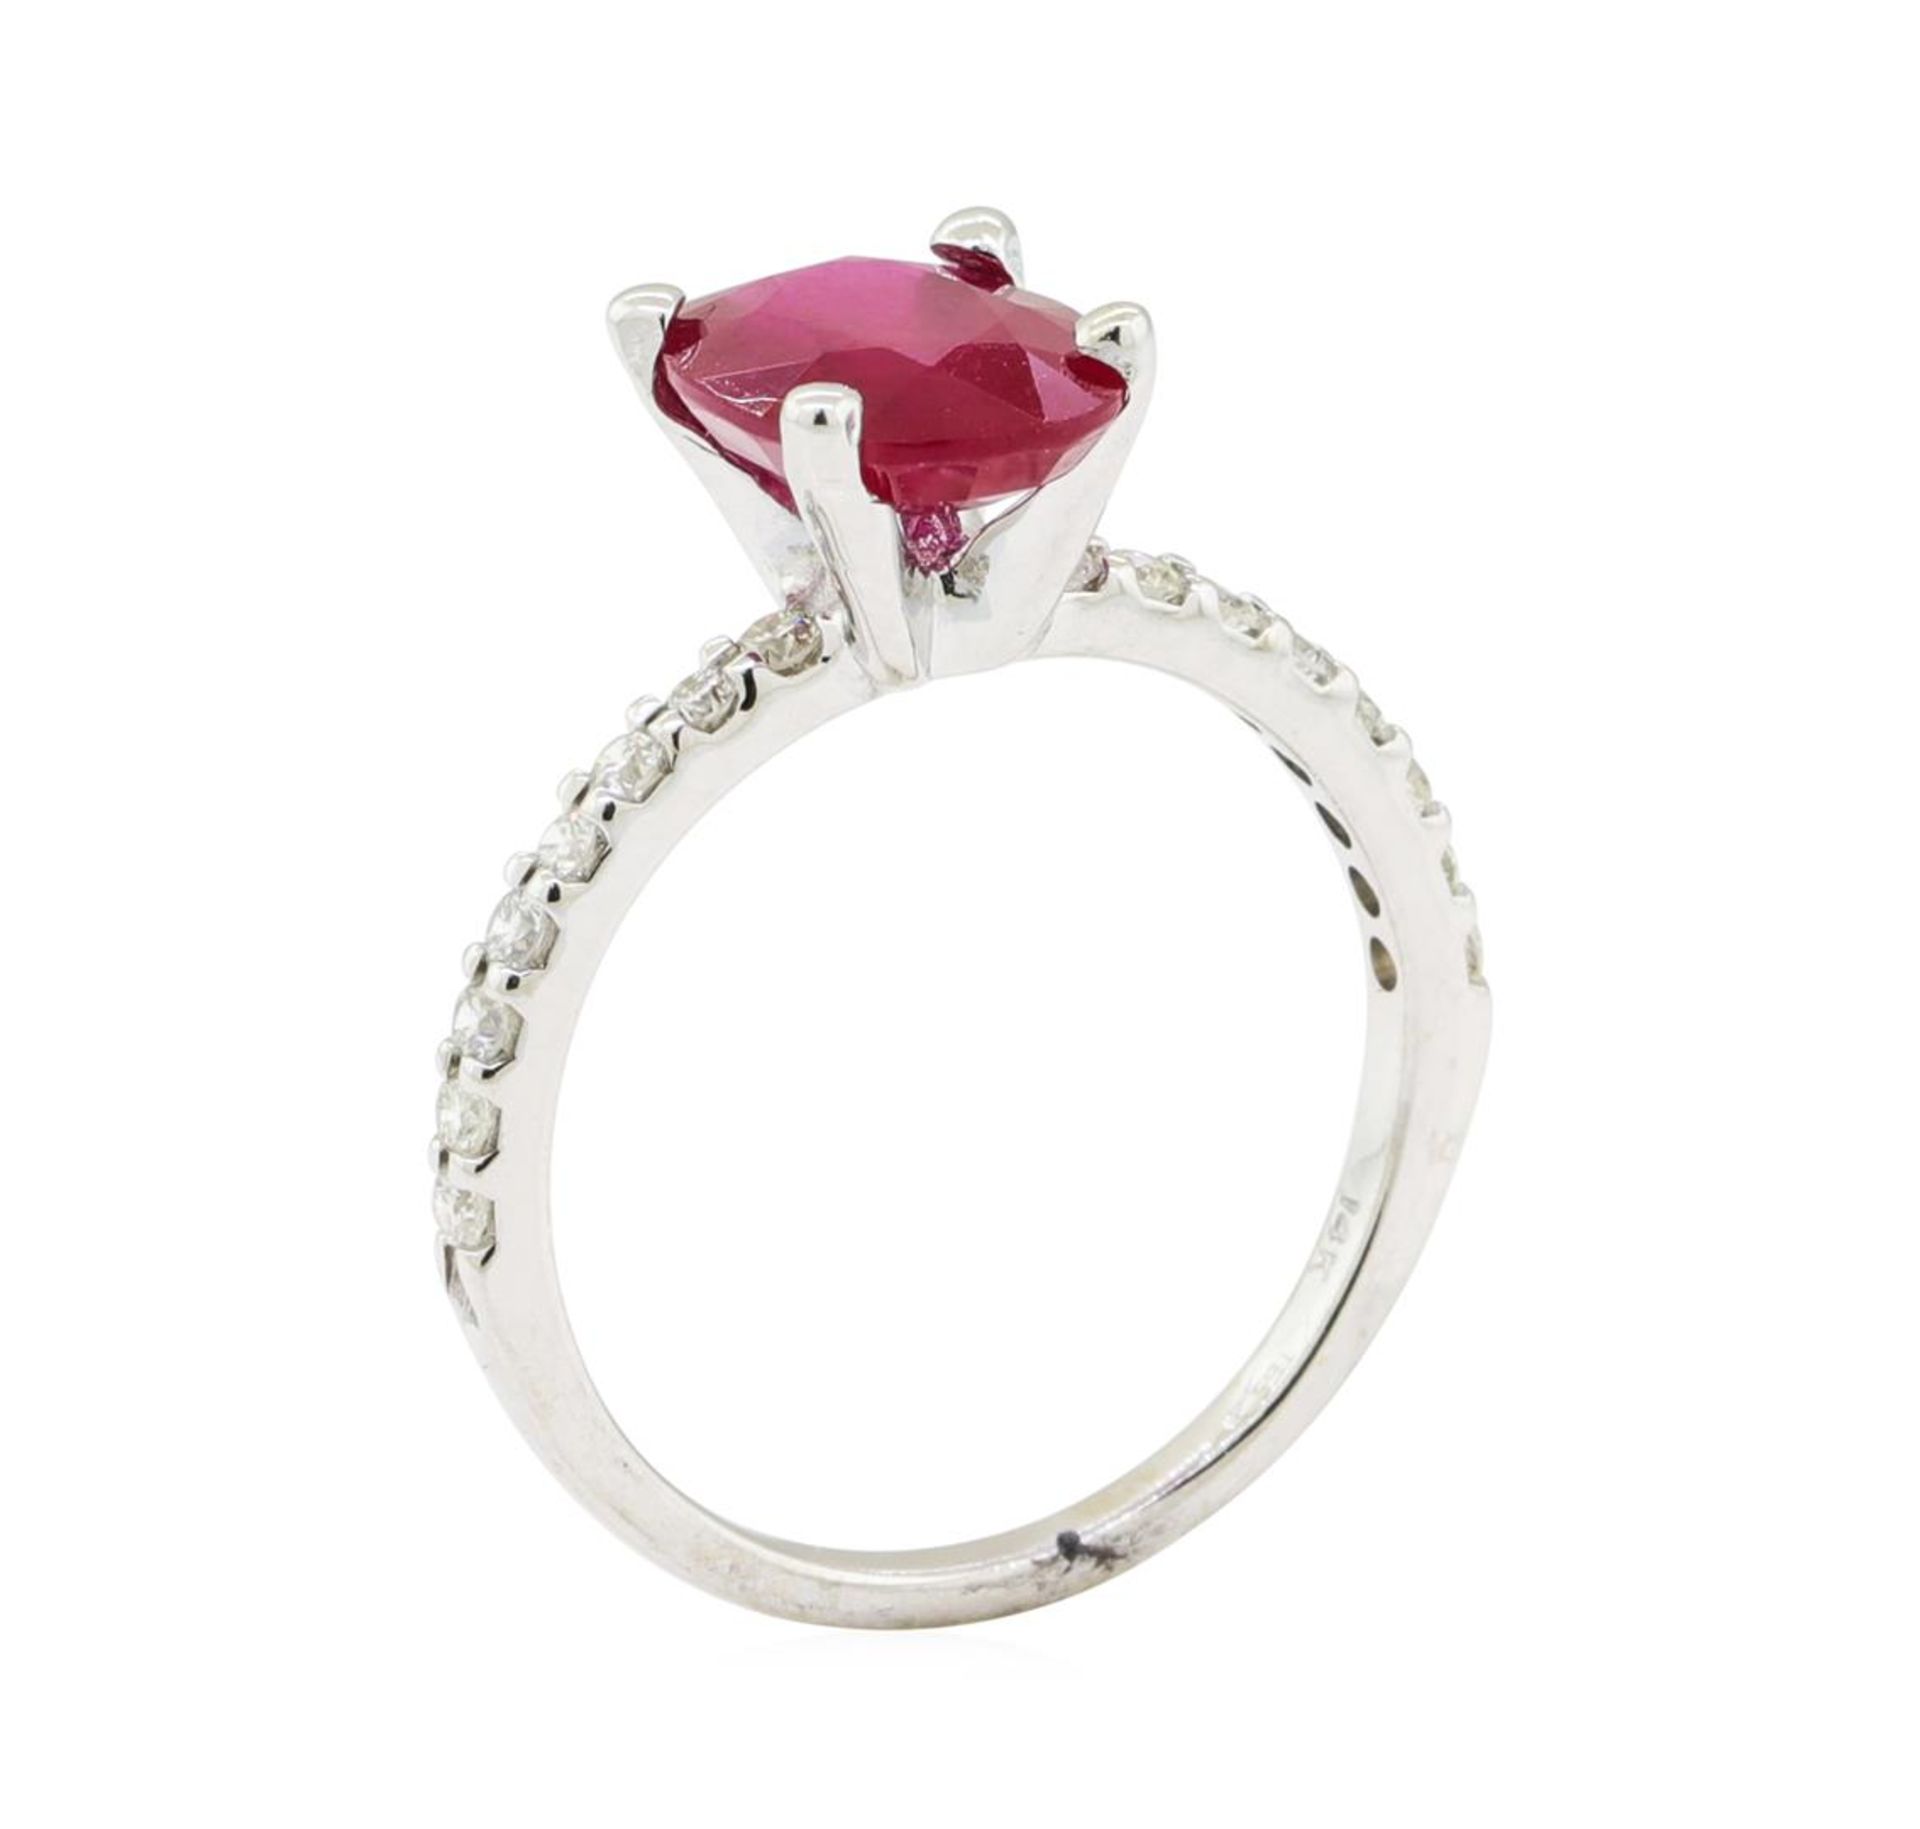 2.38ctw Glass Filled Natural Ruby and Diamond Ring - 14KT White Gold - Image 4 of 4